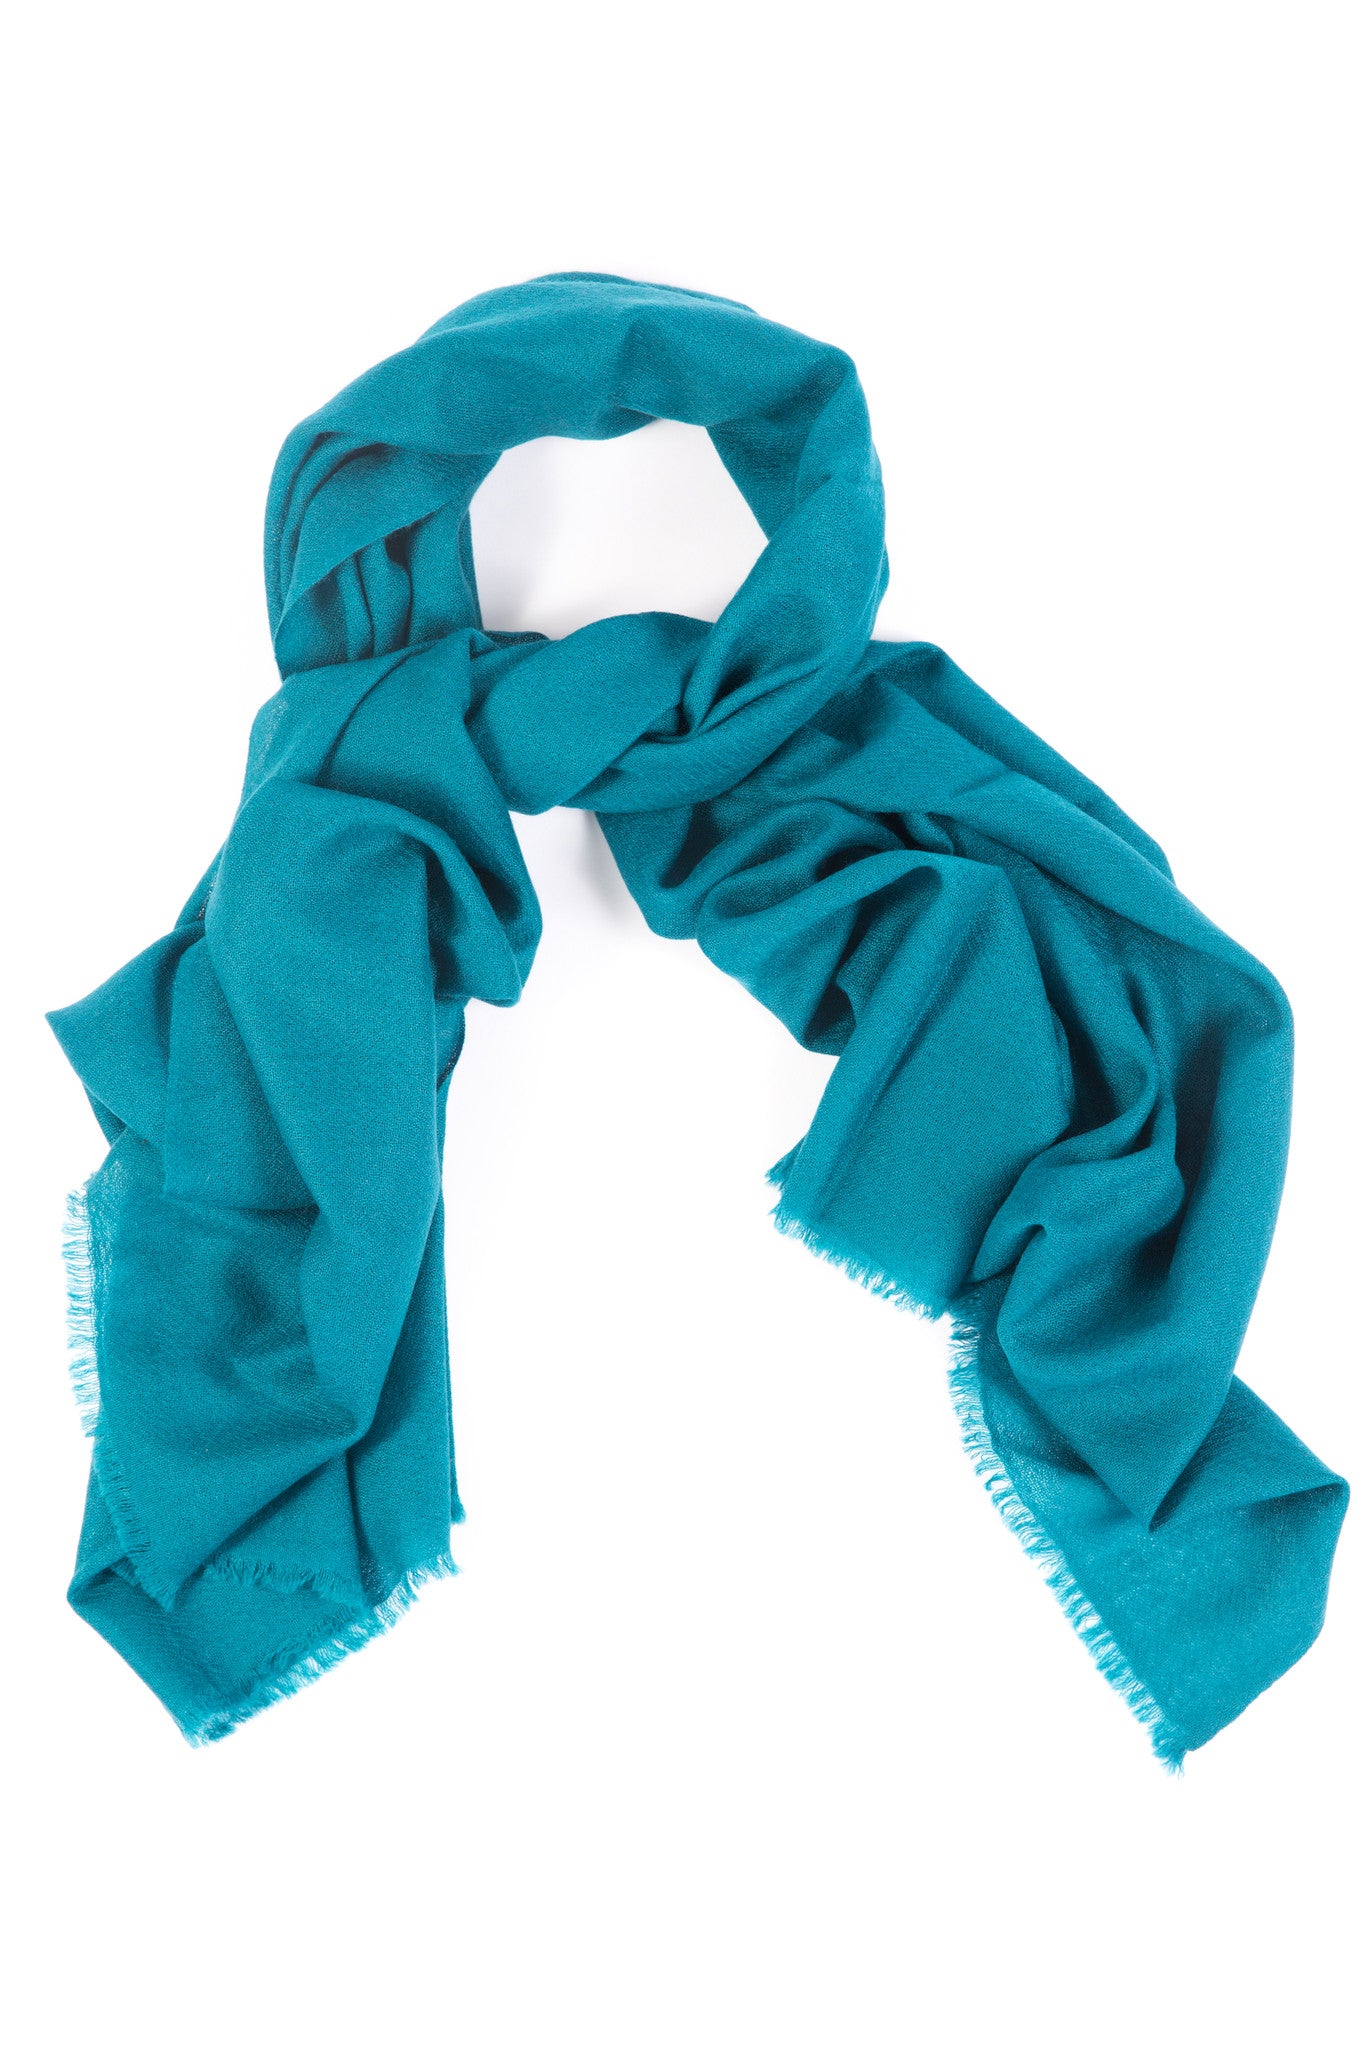 Teal Cashmere Scarf Hotsell, 59% OFF ...